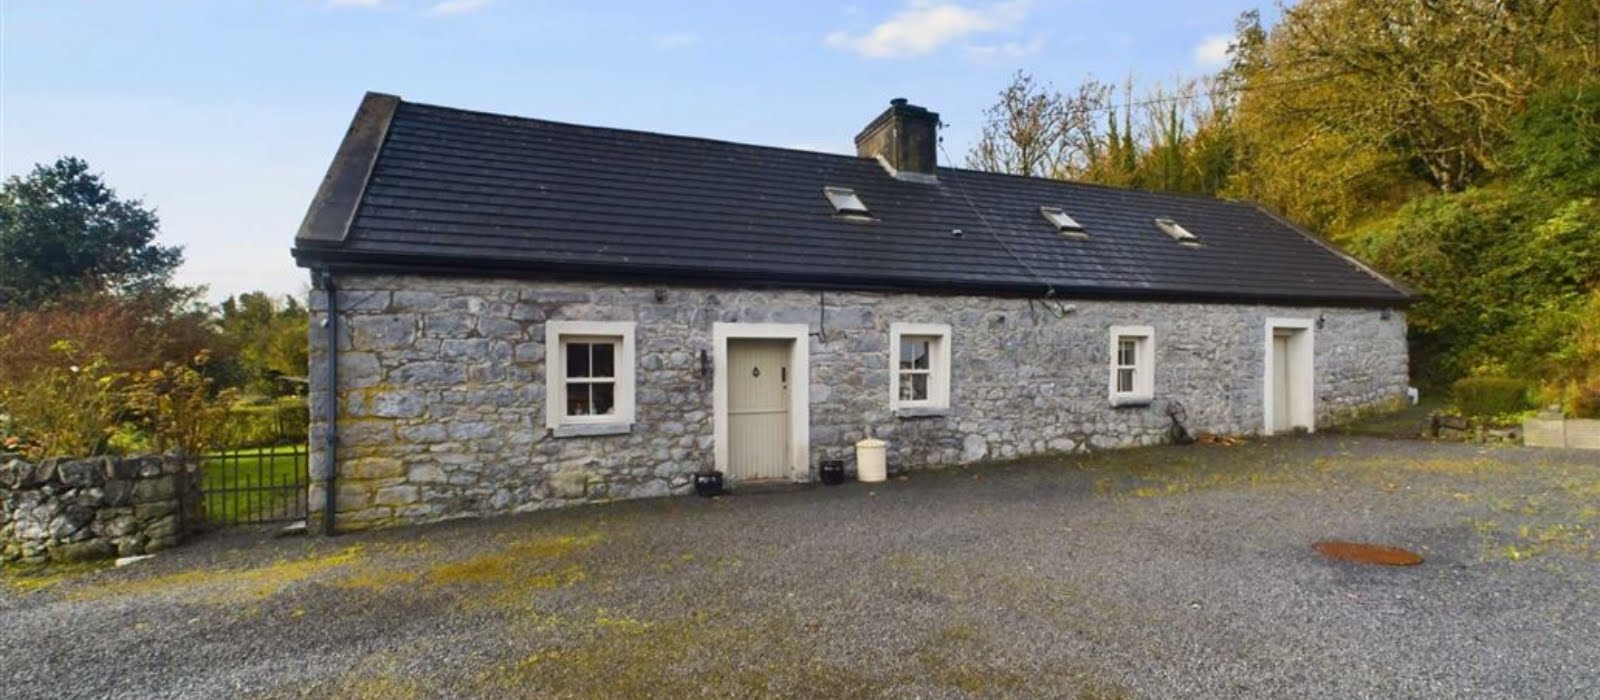 3 Irish cottages on the market for under €425,000